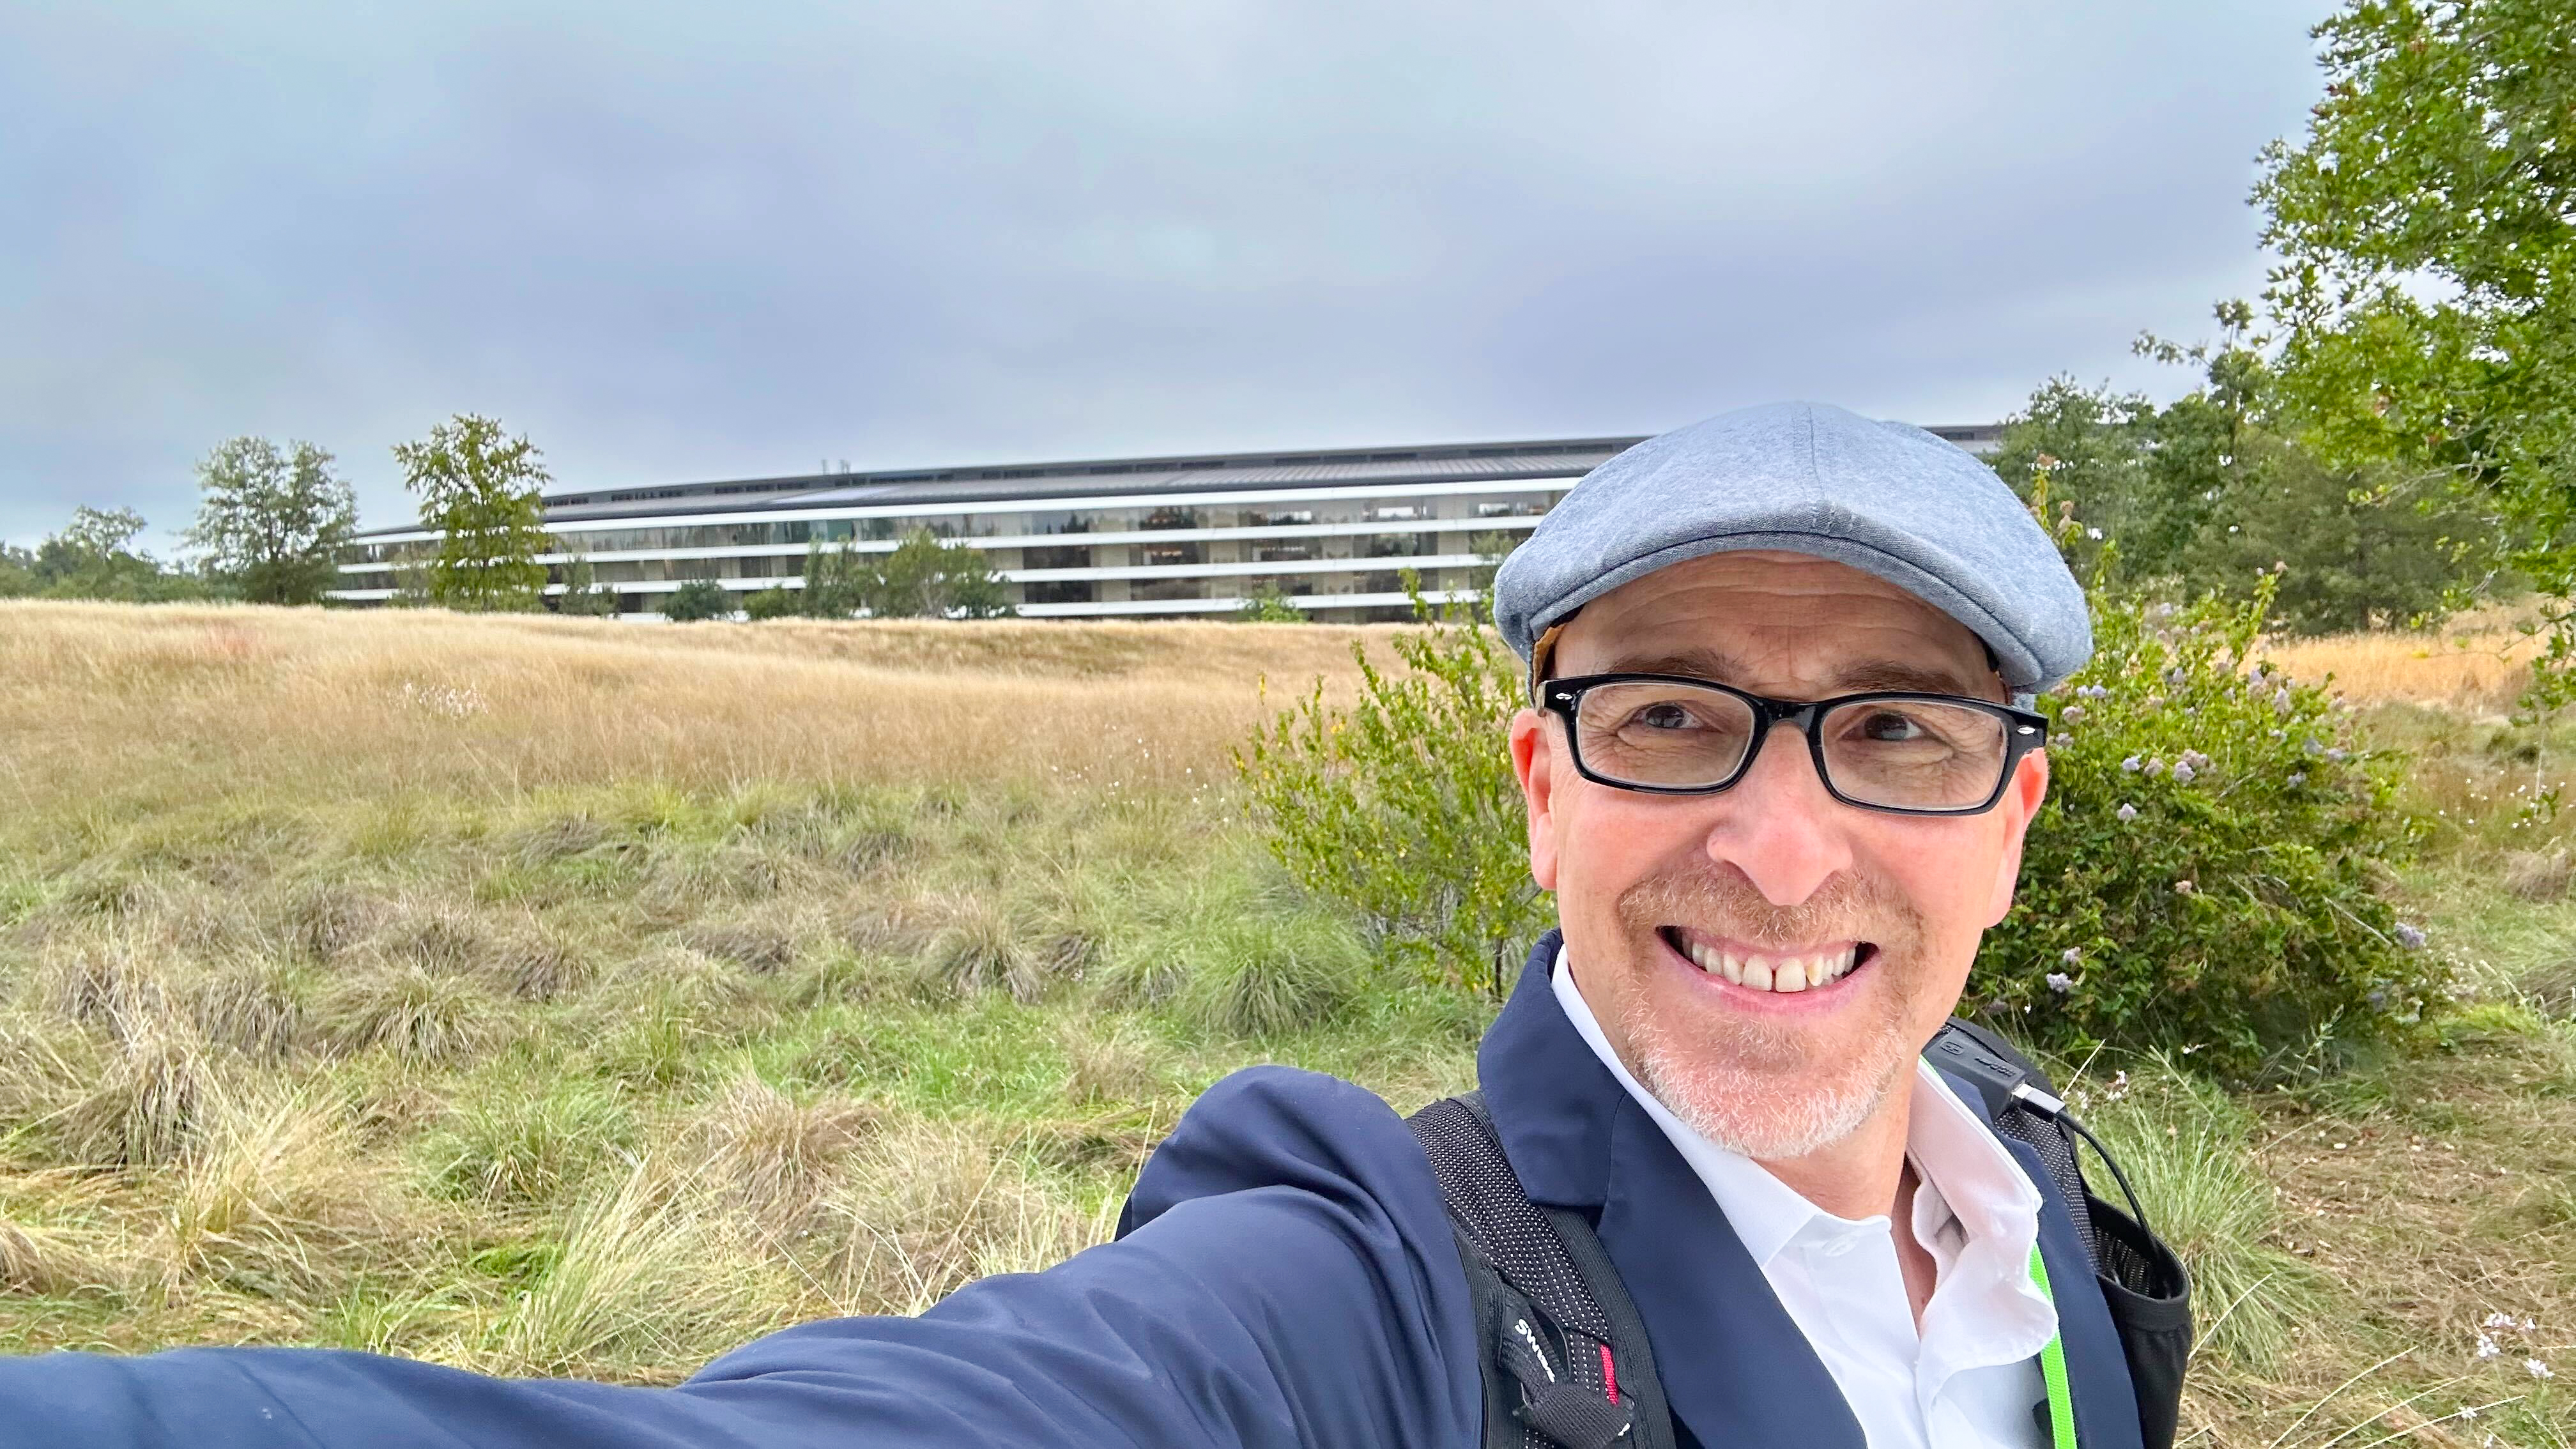 Lance on Apple Park campus grounds